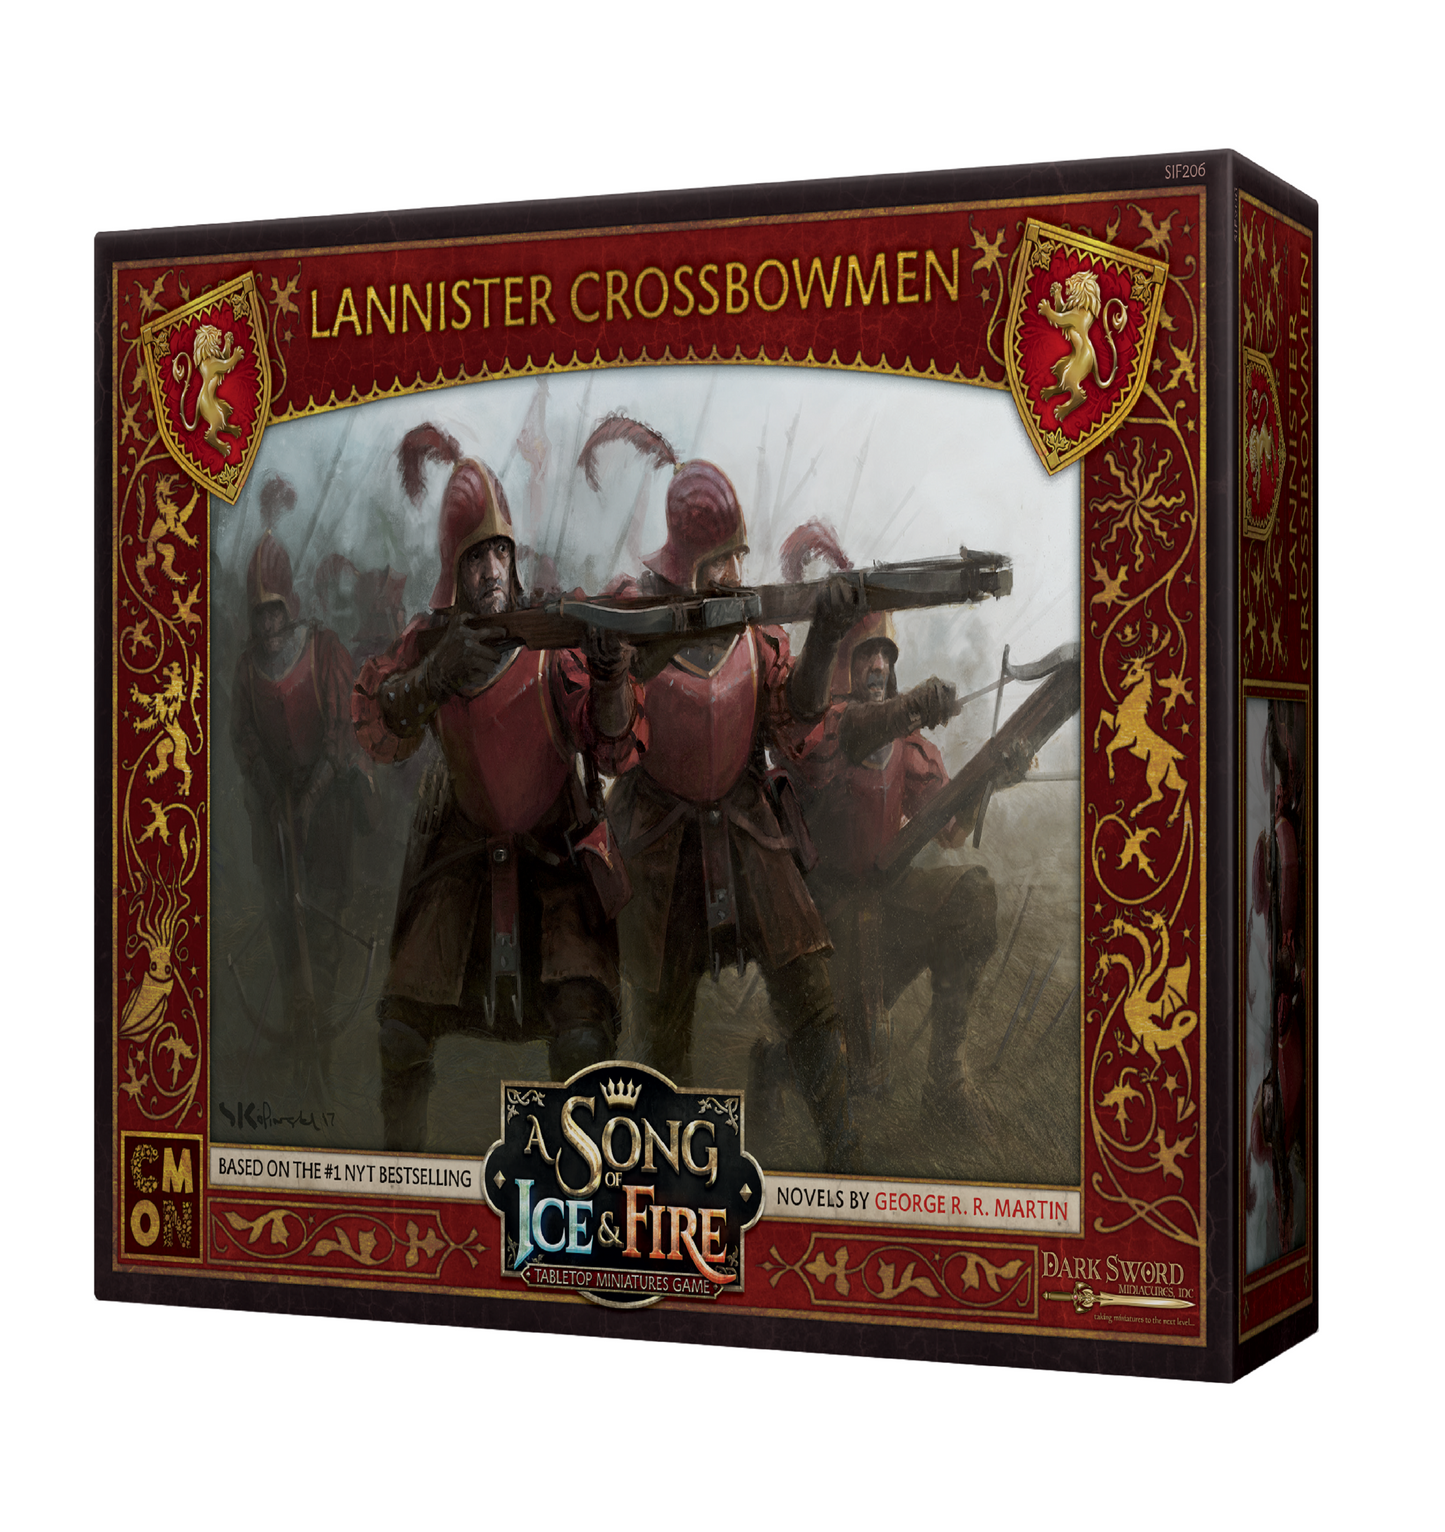 Lannister Crossbowmen A Song Of Ice and Fire